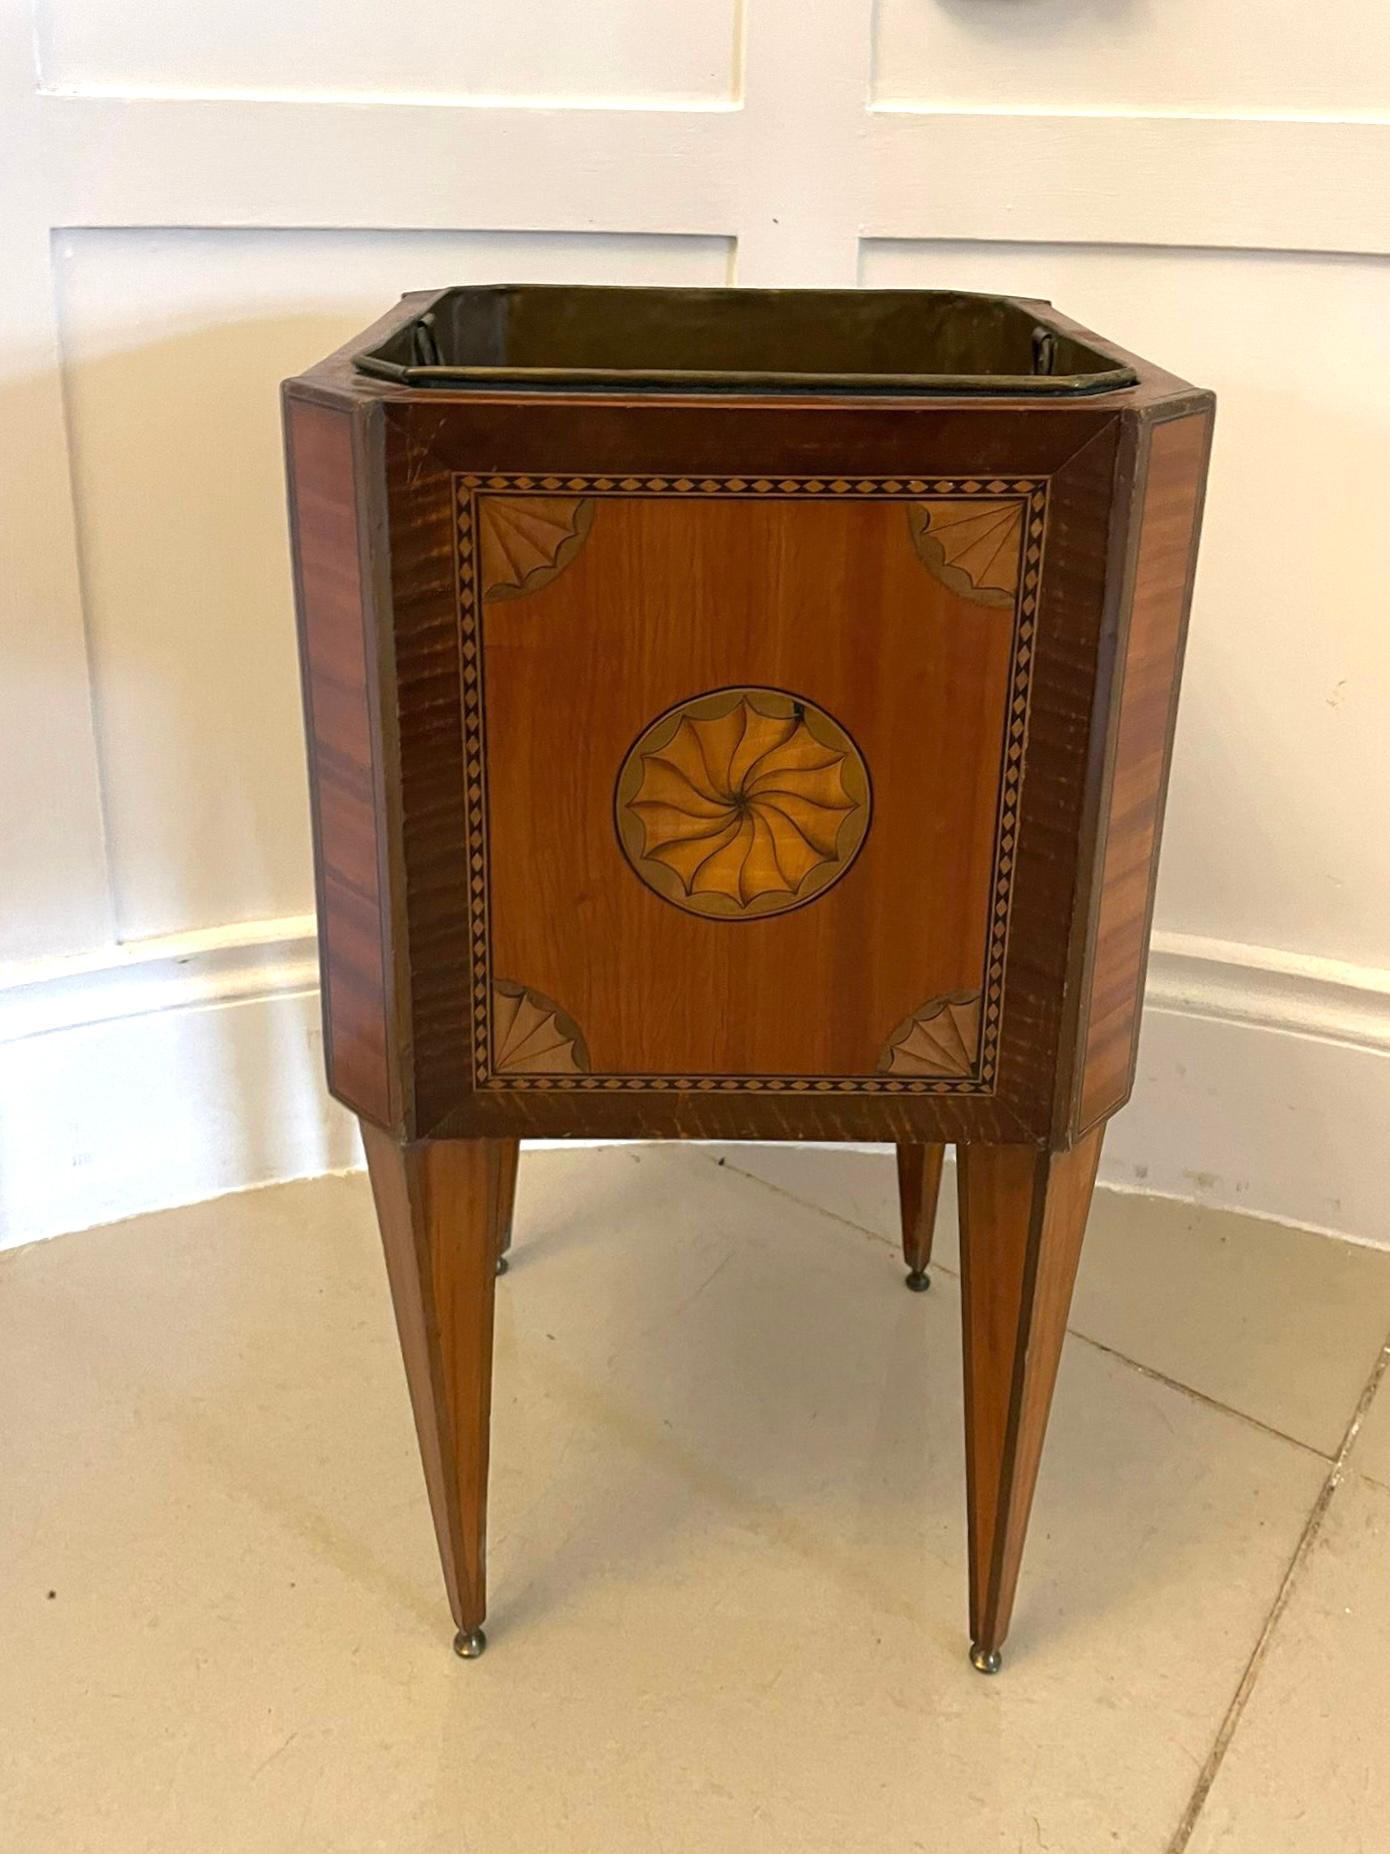 Antique George III Quality Satinwood Inlaid Freestanding Champagne/Wine Cooler For Sale 2